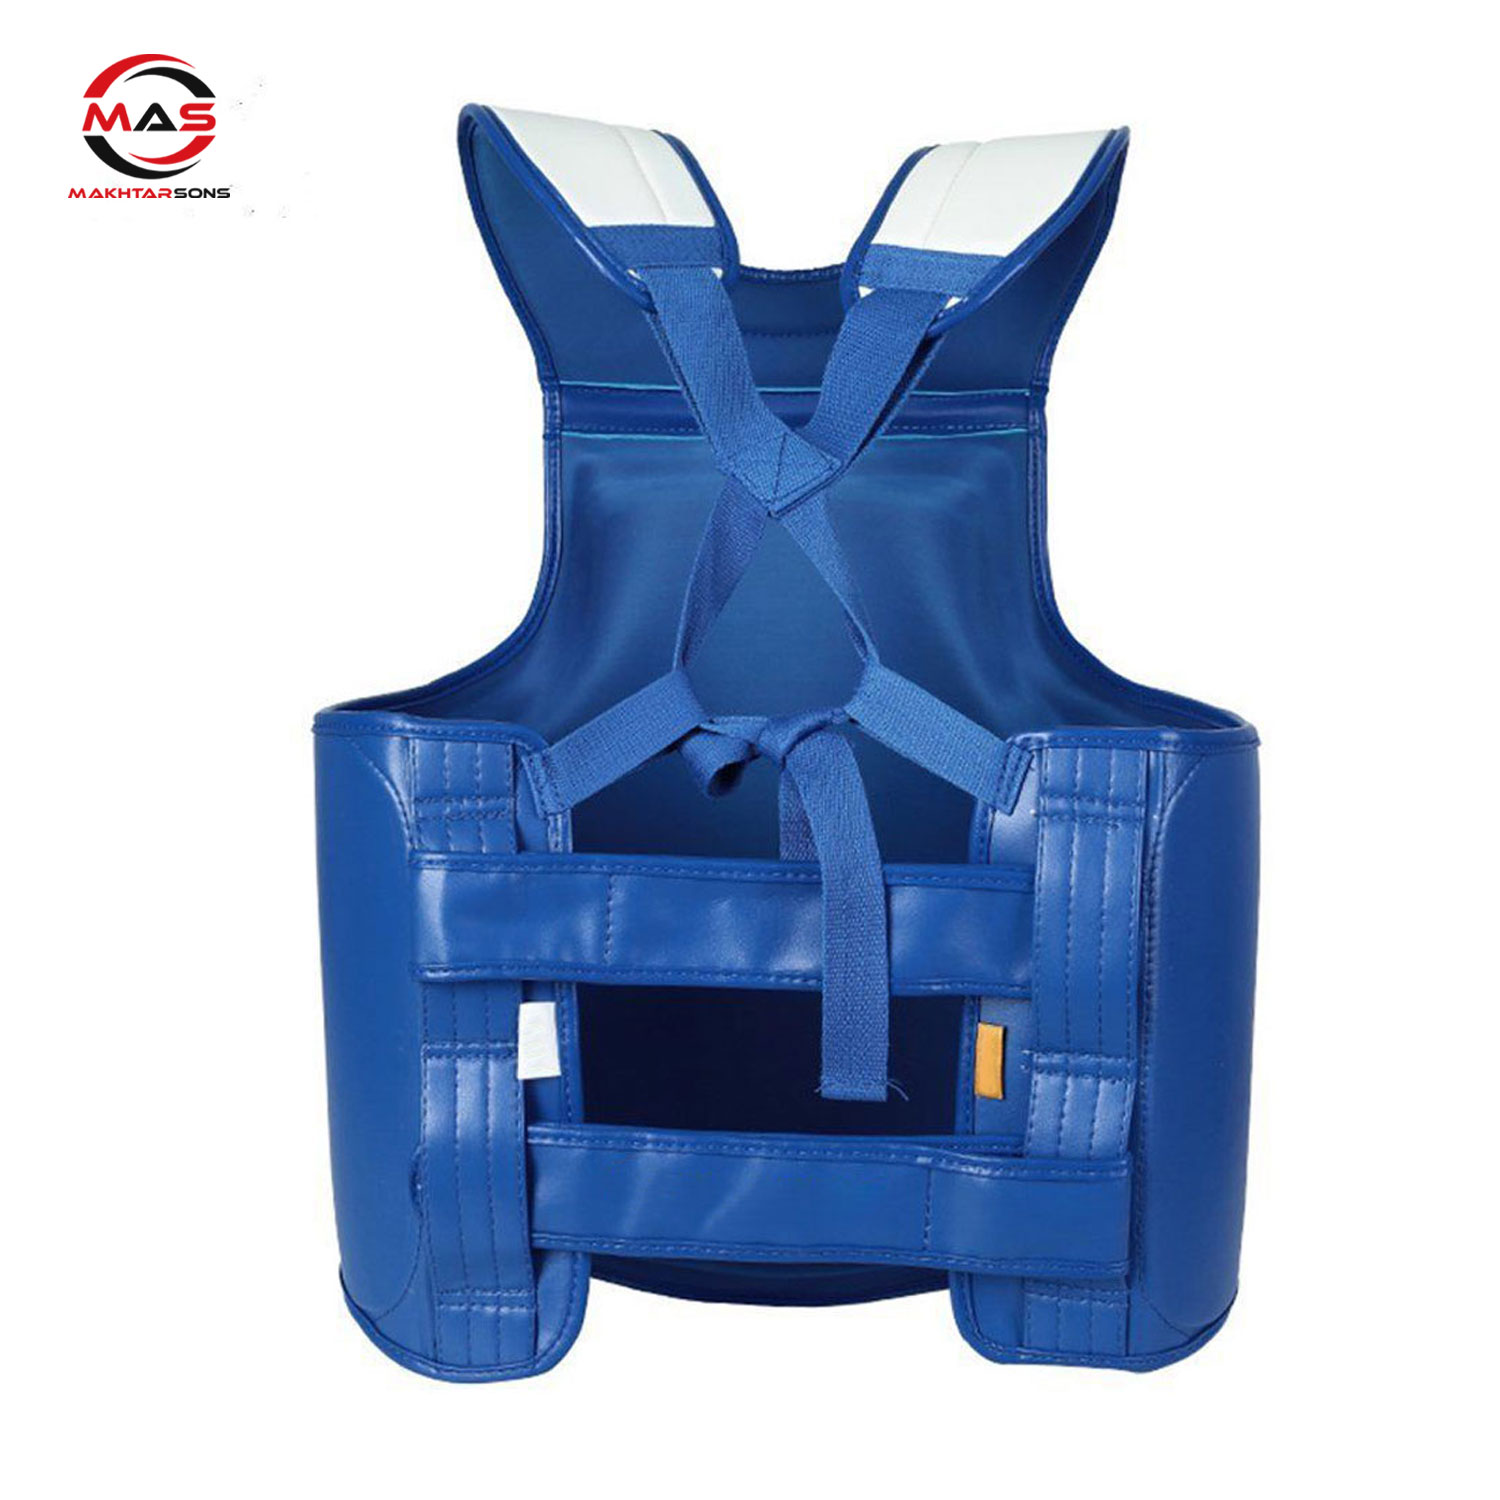 BODY CHEST PROTECTOR | MAS 282